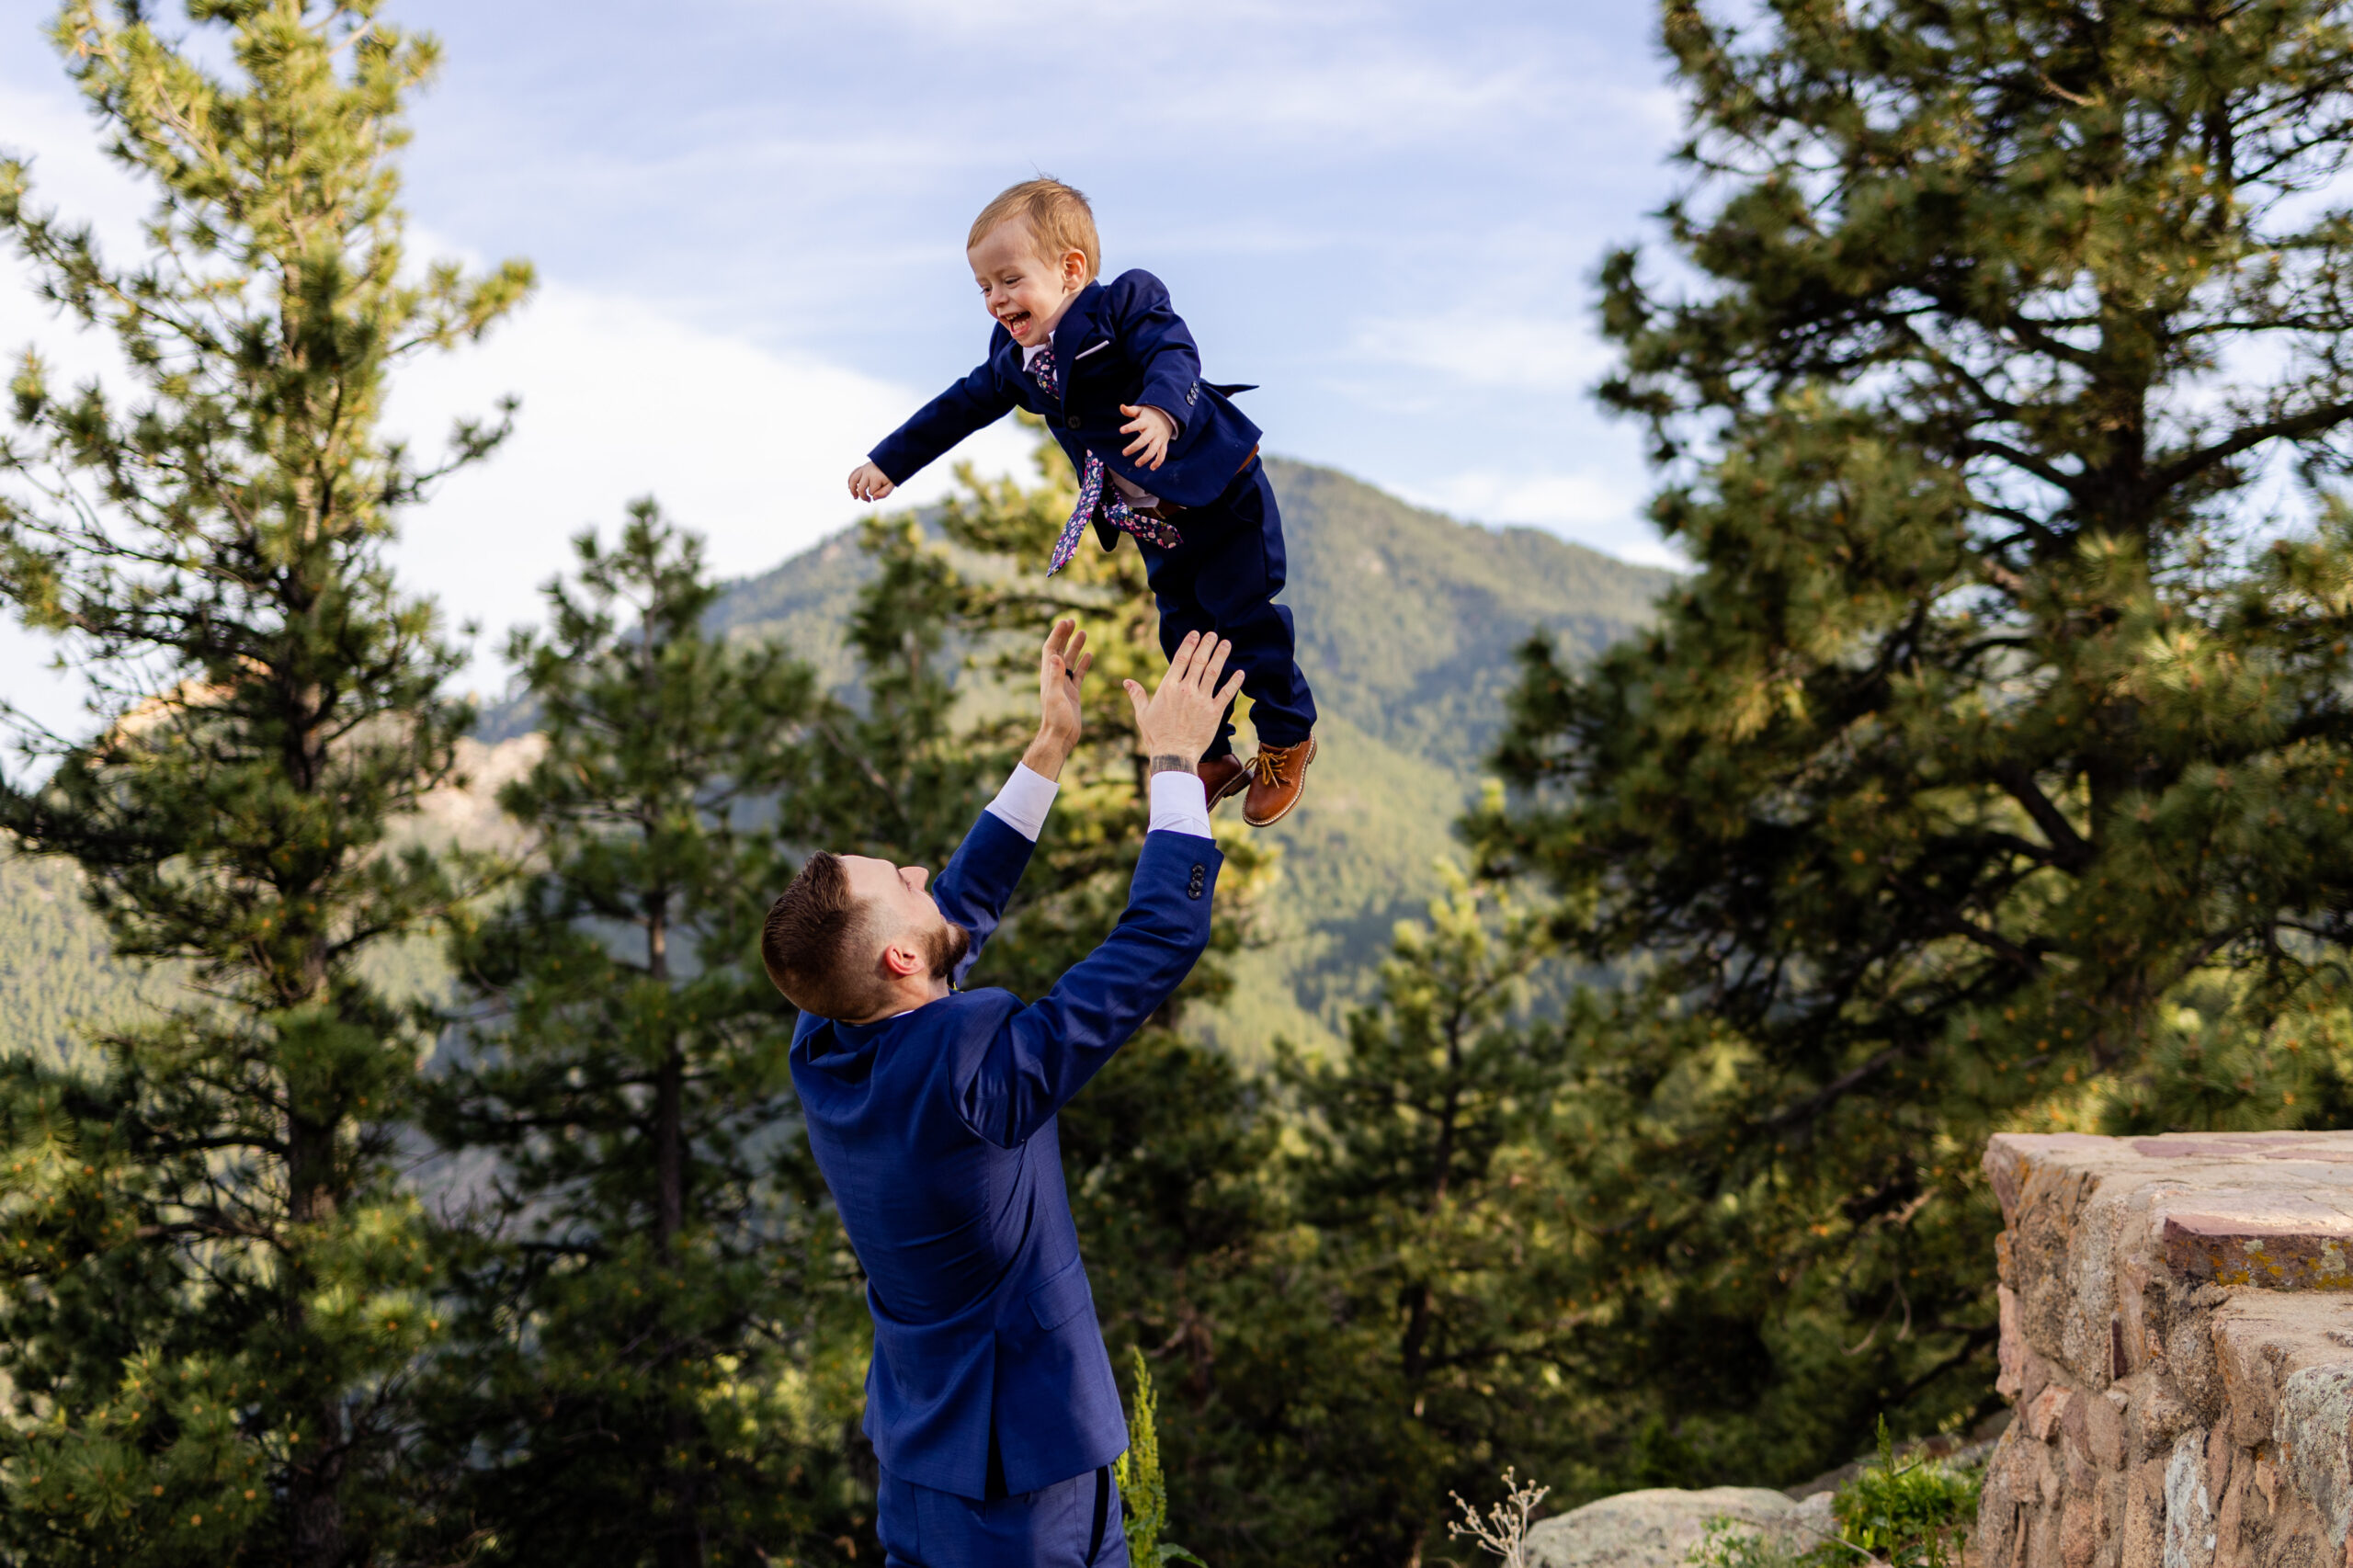 The groom throws his son in the air at Sunrise Amphitheater during their Elopement.